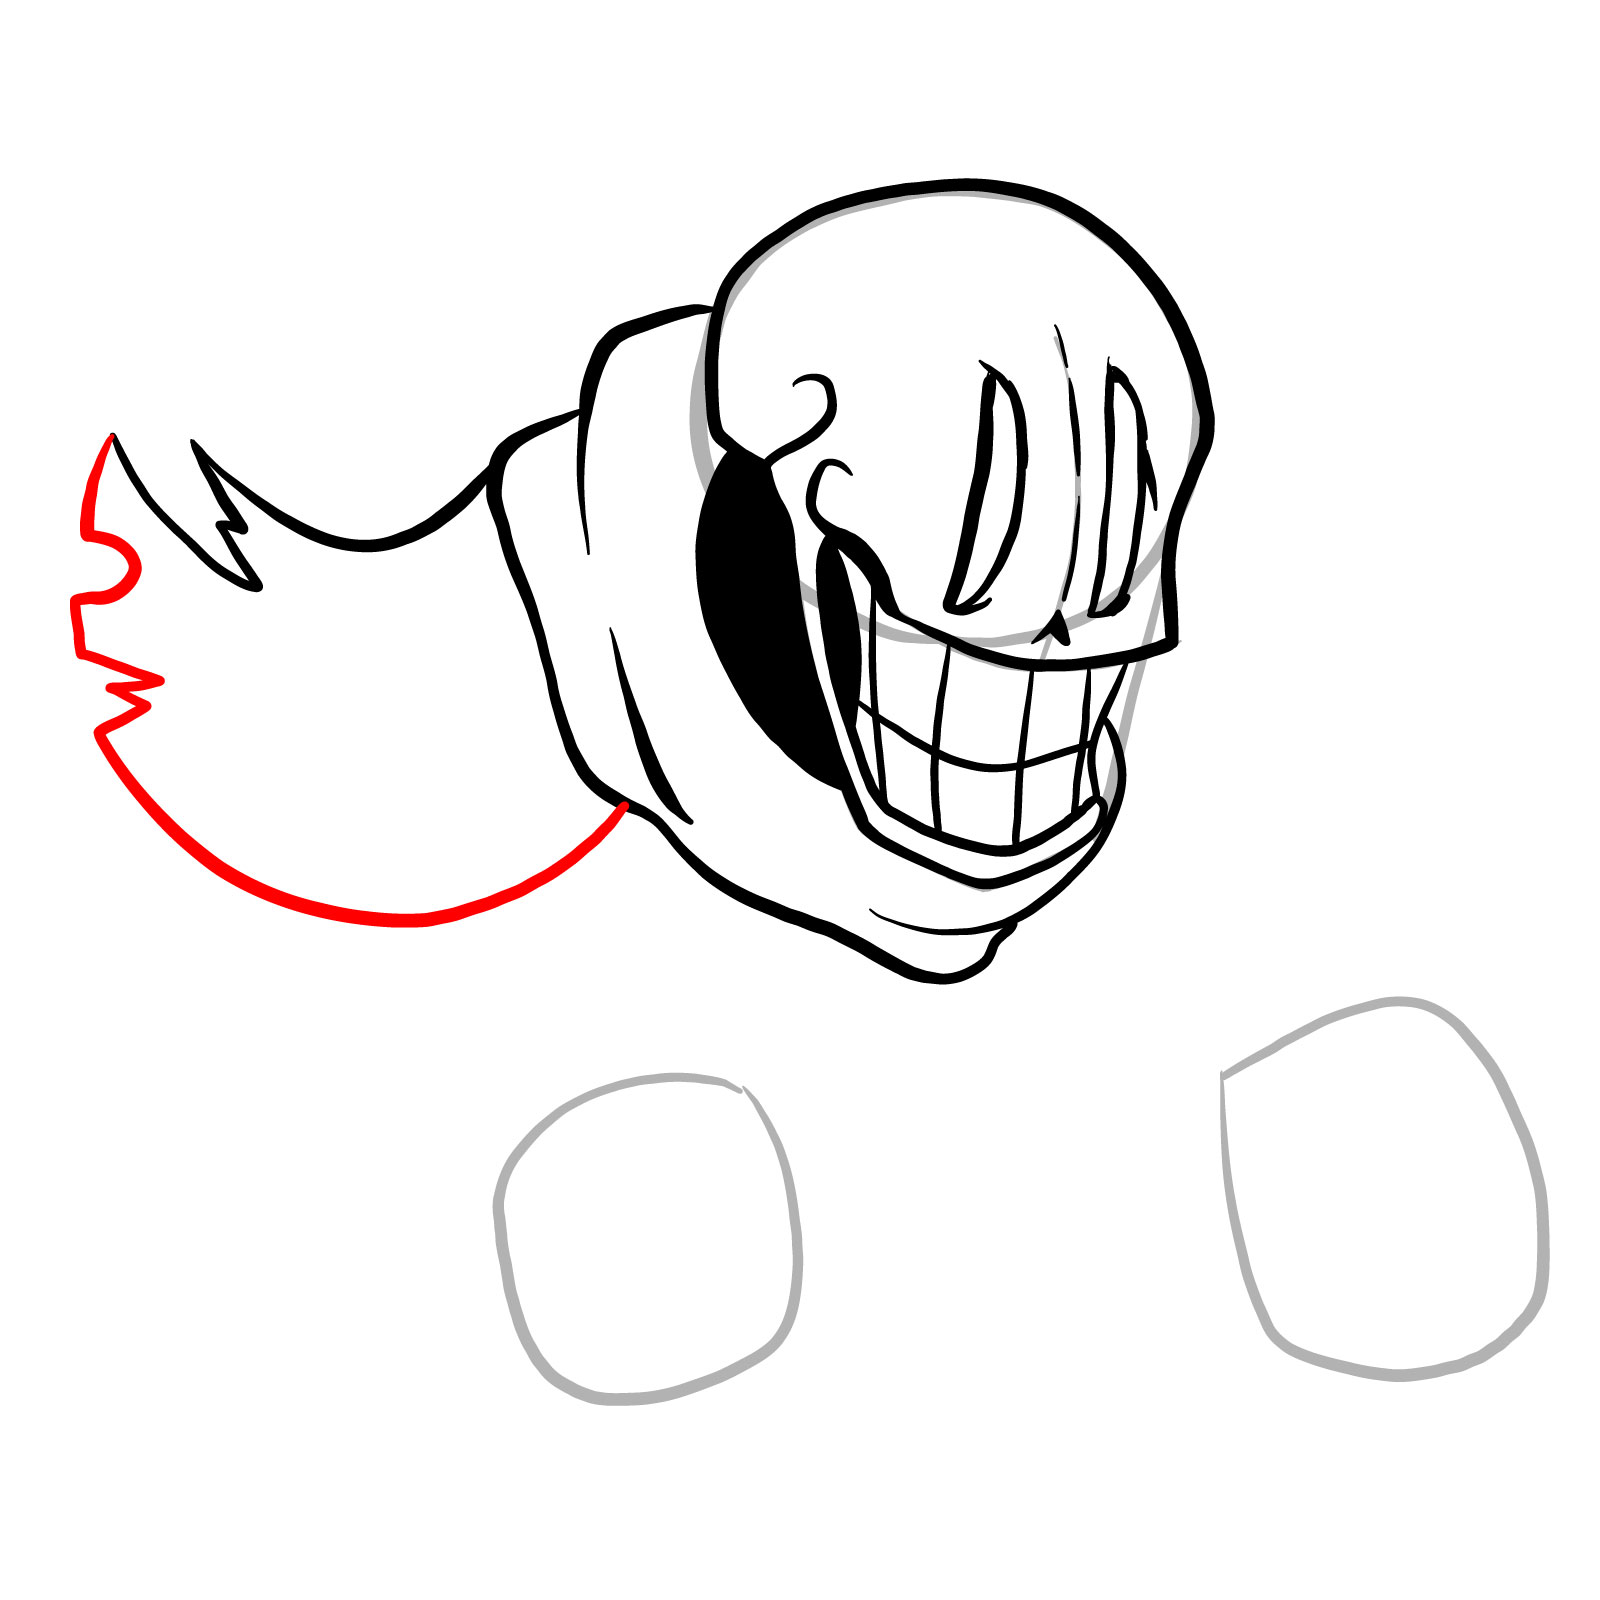 How to draw Phantom!Papyrus from FNF - step 15